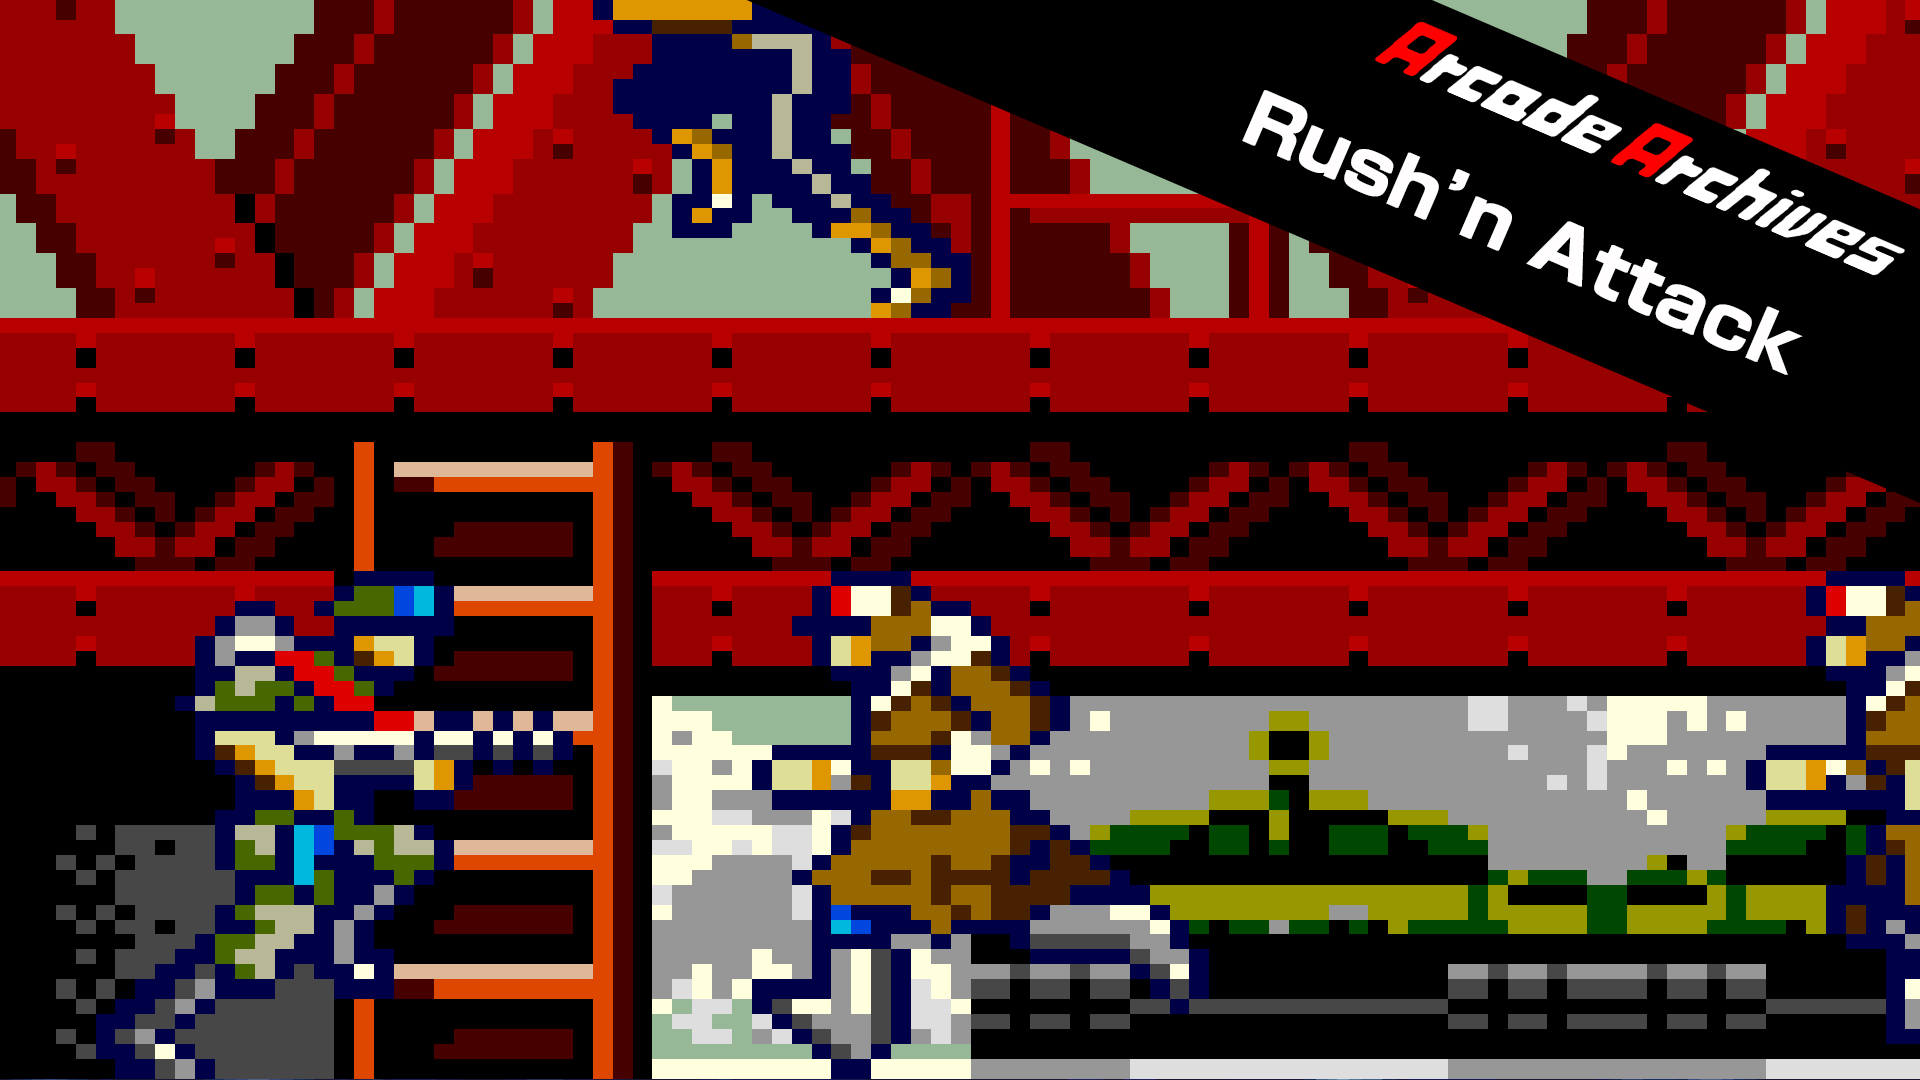 Rush'n Attack NES. Yie ar Kung-Fu NES. Green Berets игра. Panzer Attack NES.